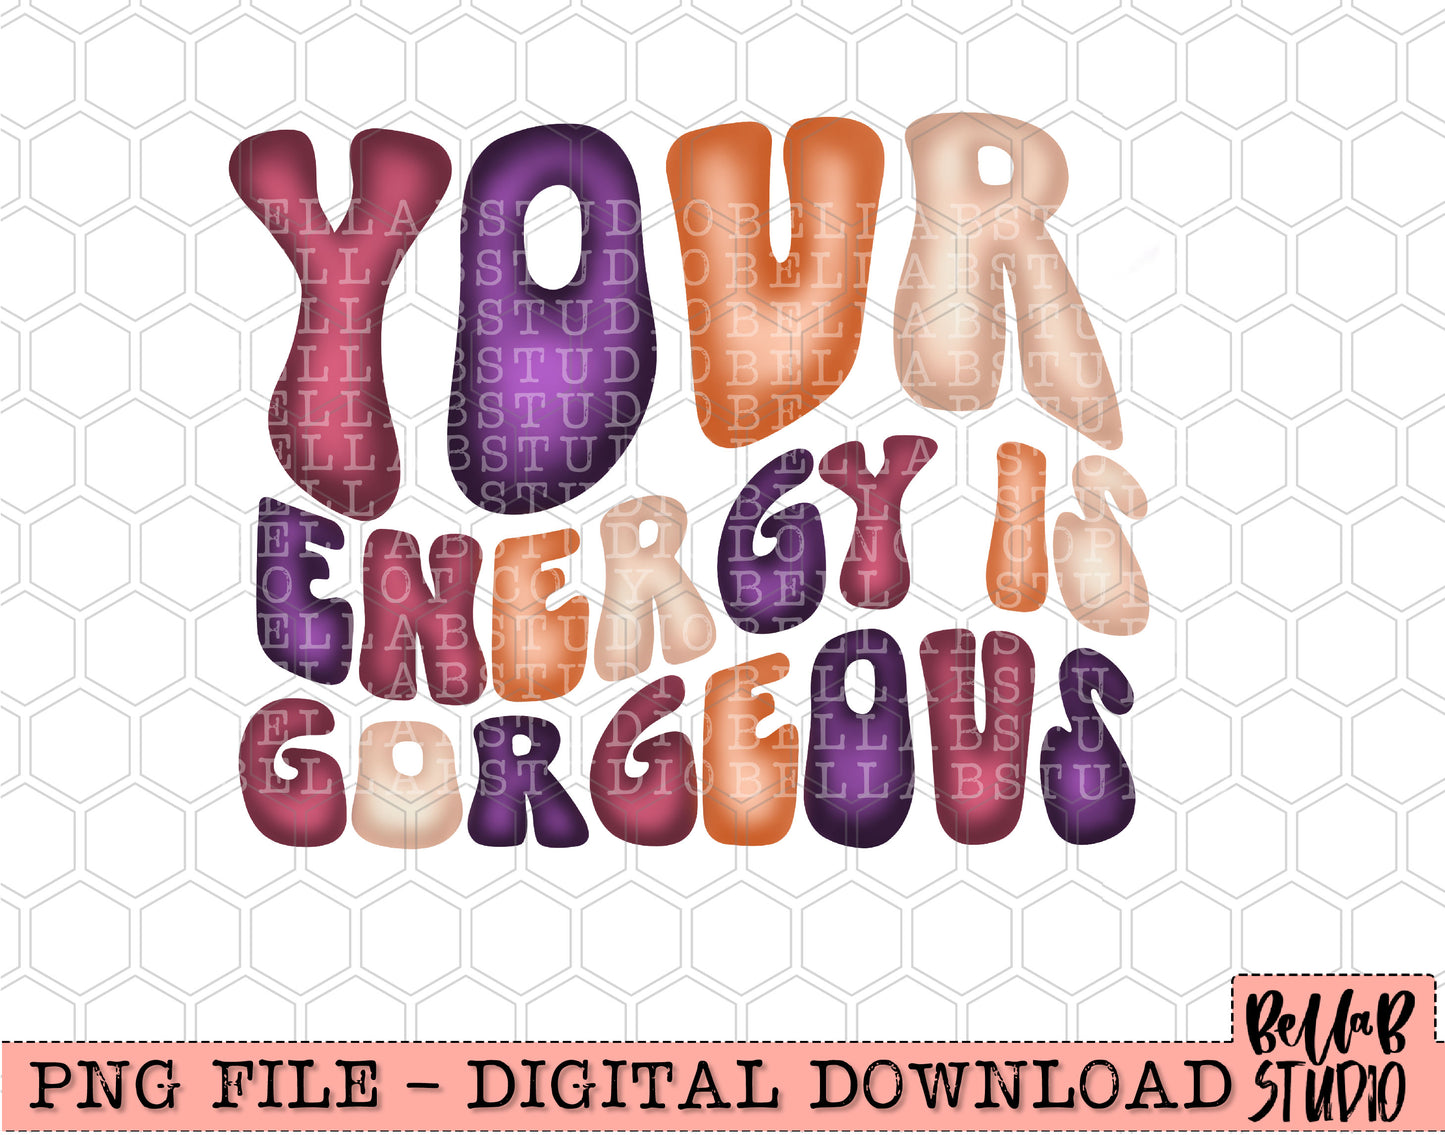 Your Energy Is Gorgeous PNG Design